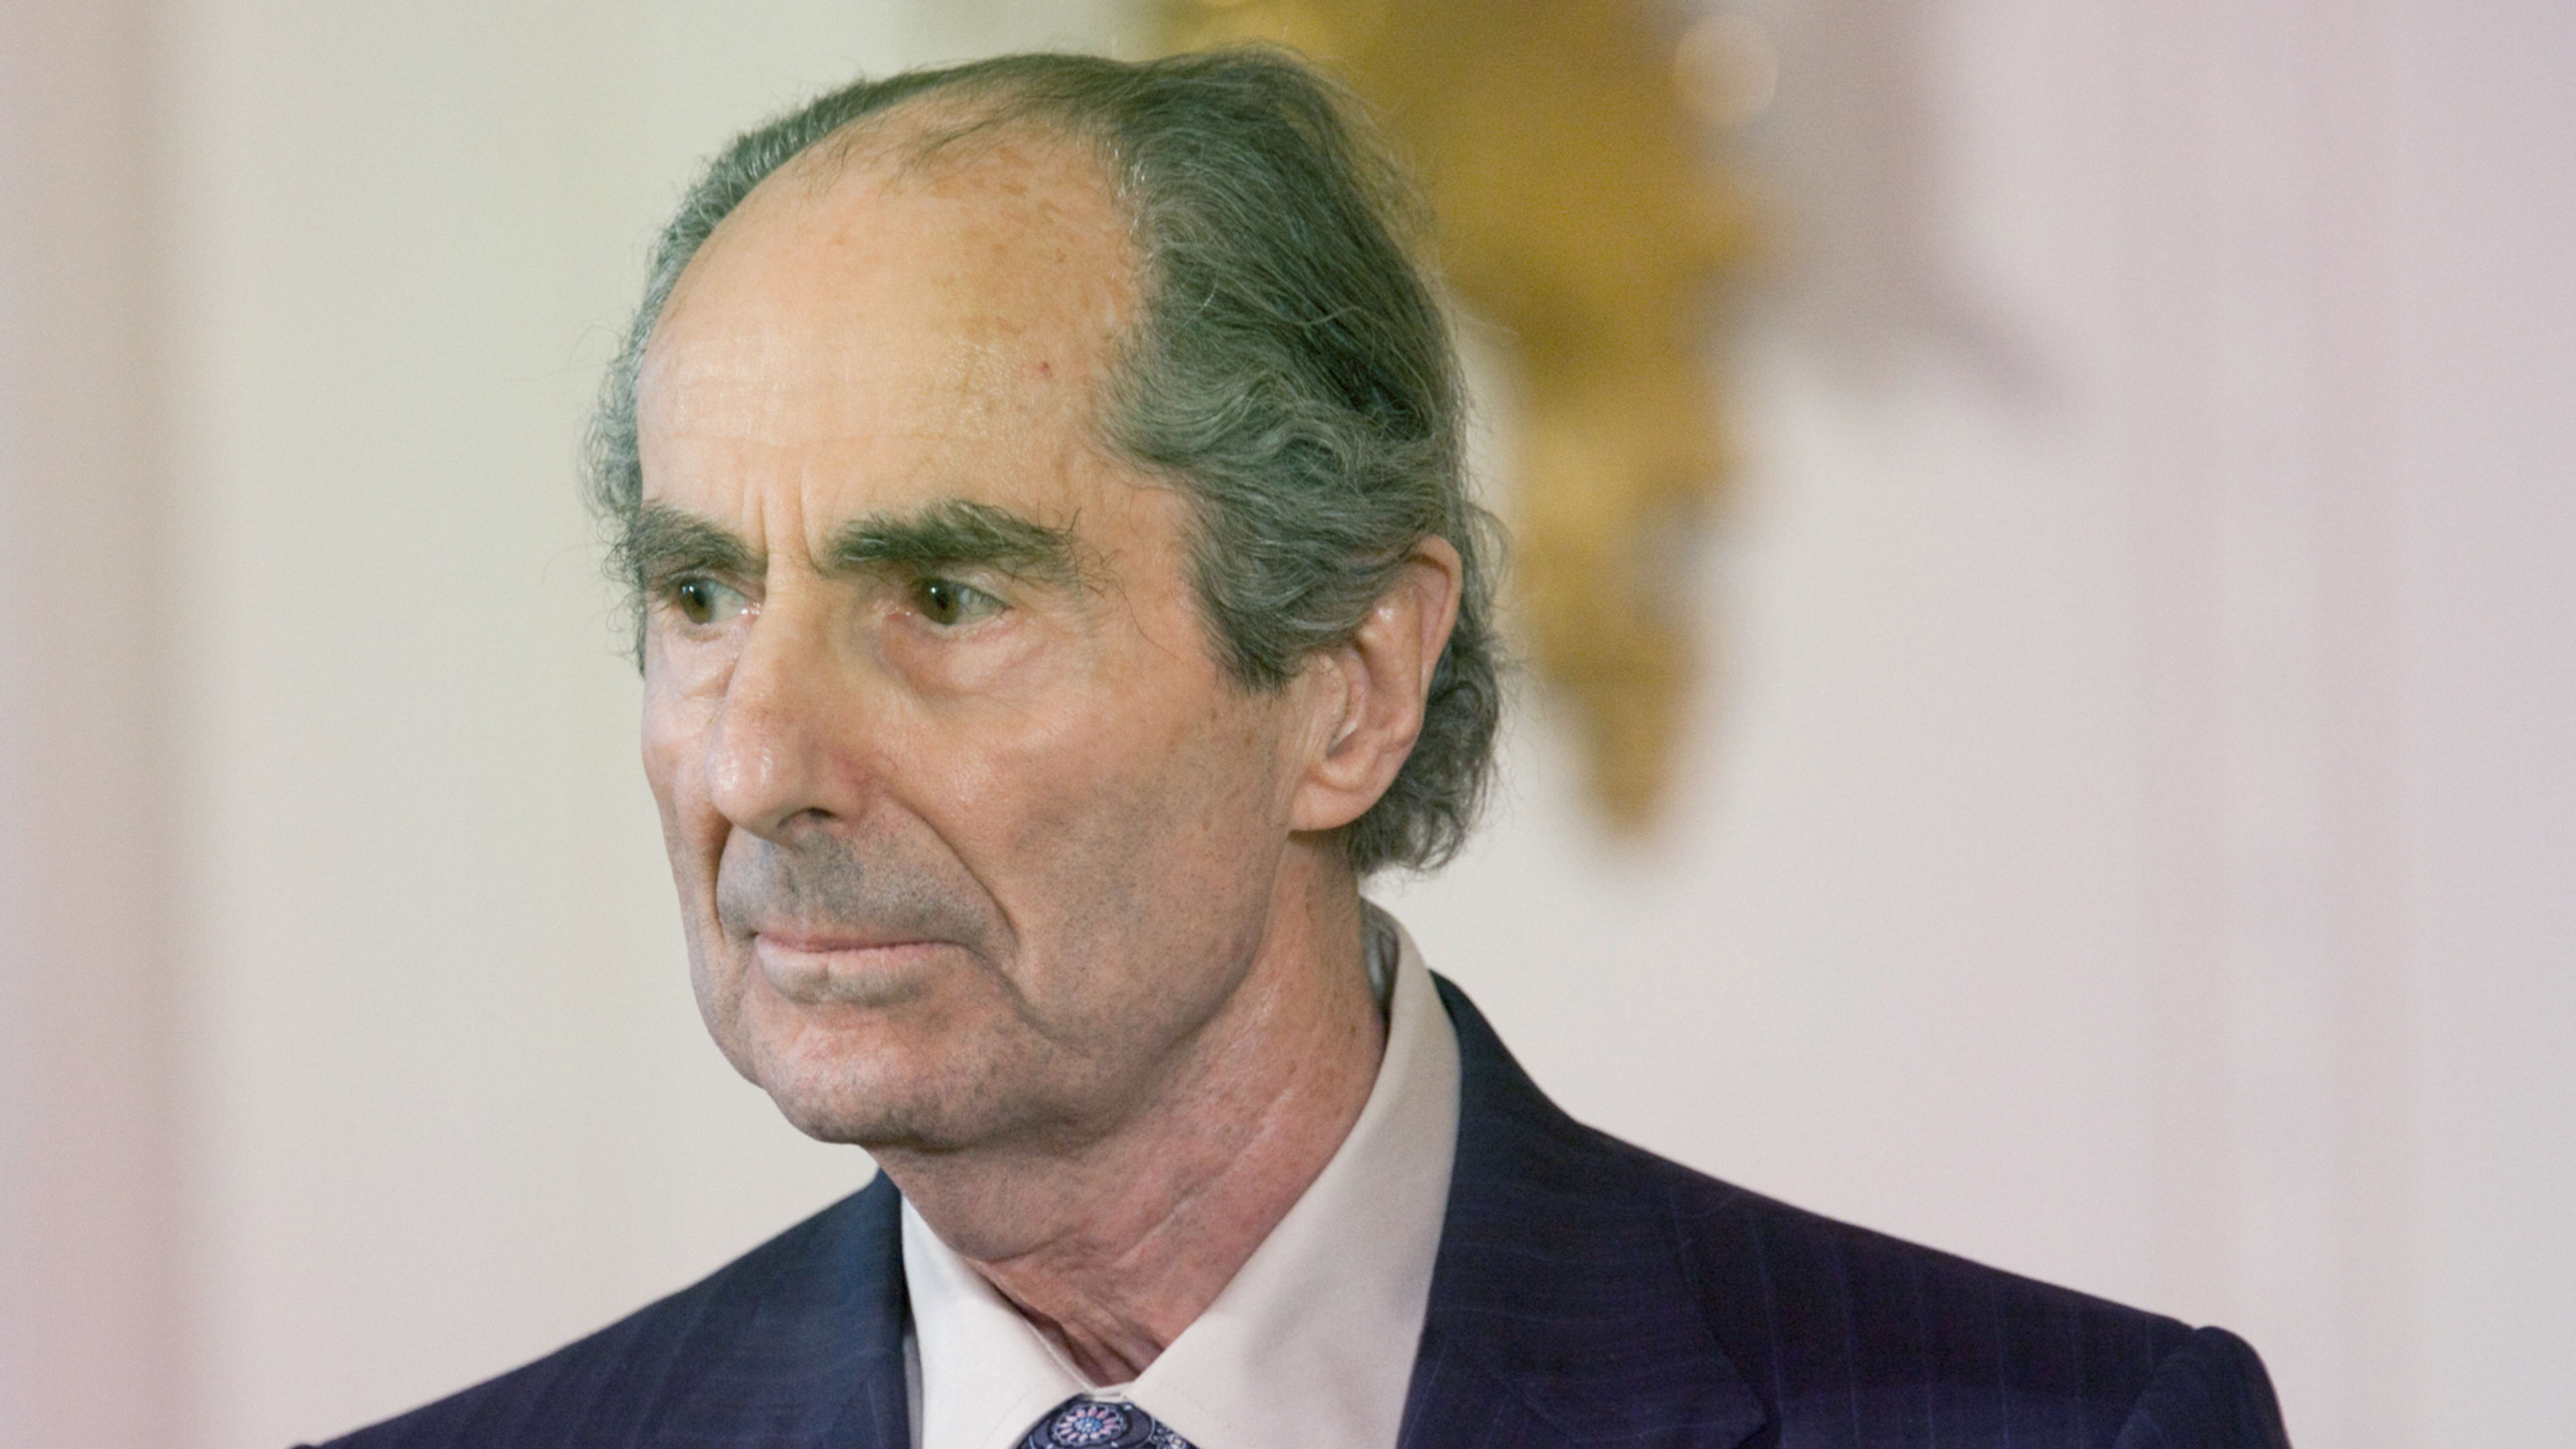 Novelist Philip Roth has died at age 85